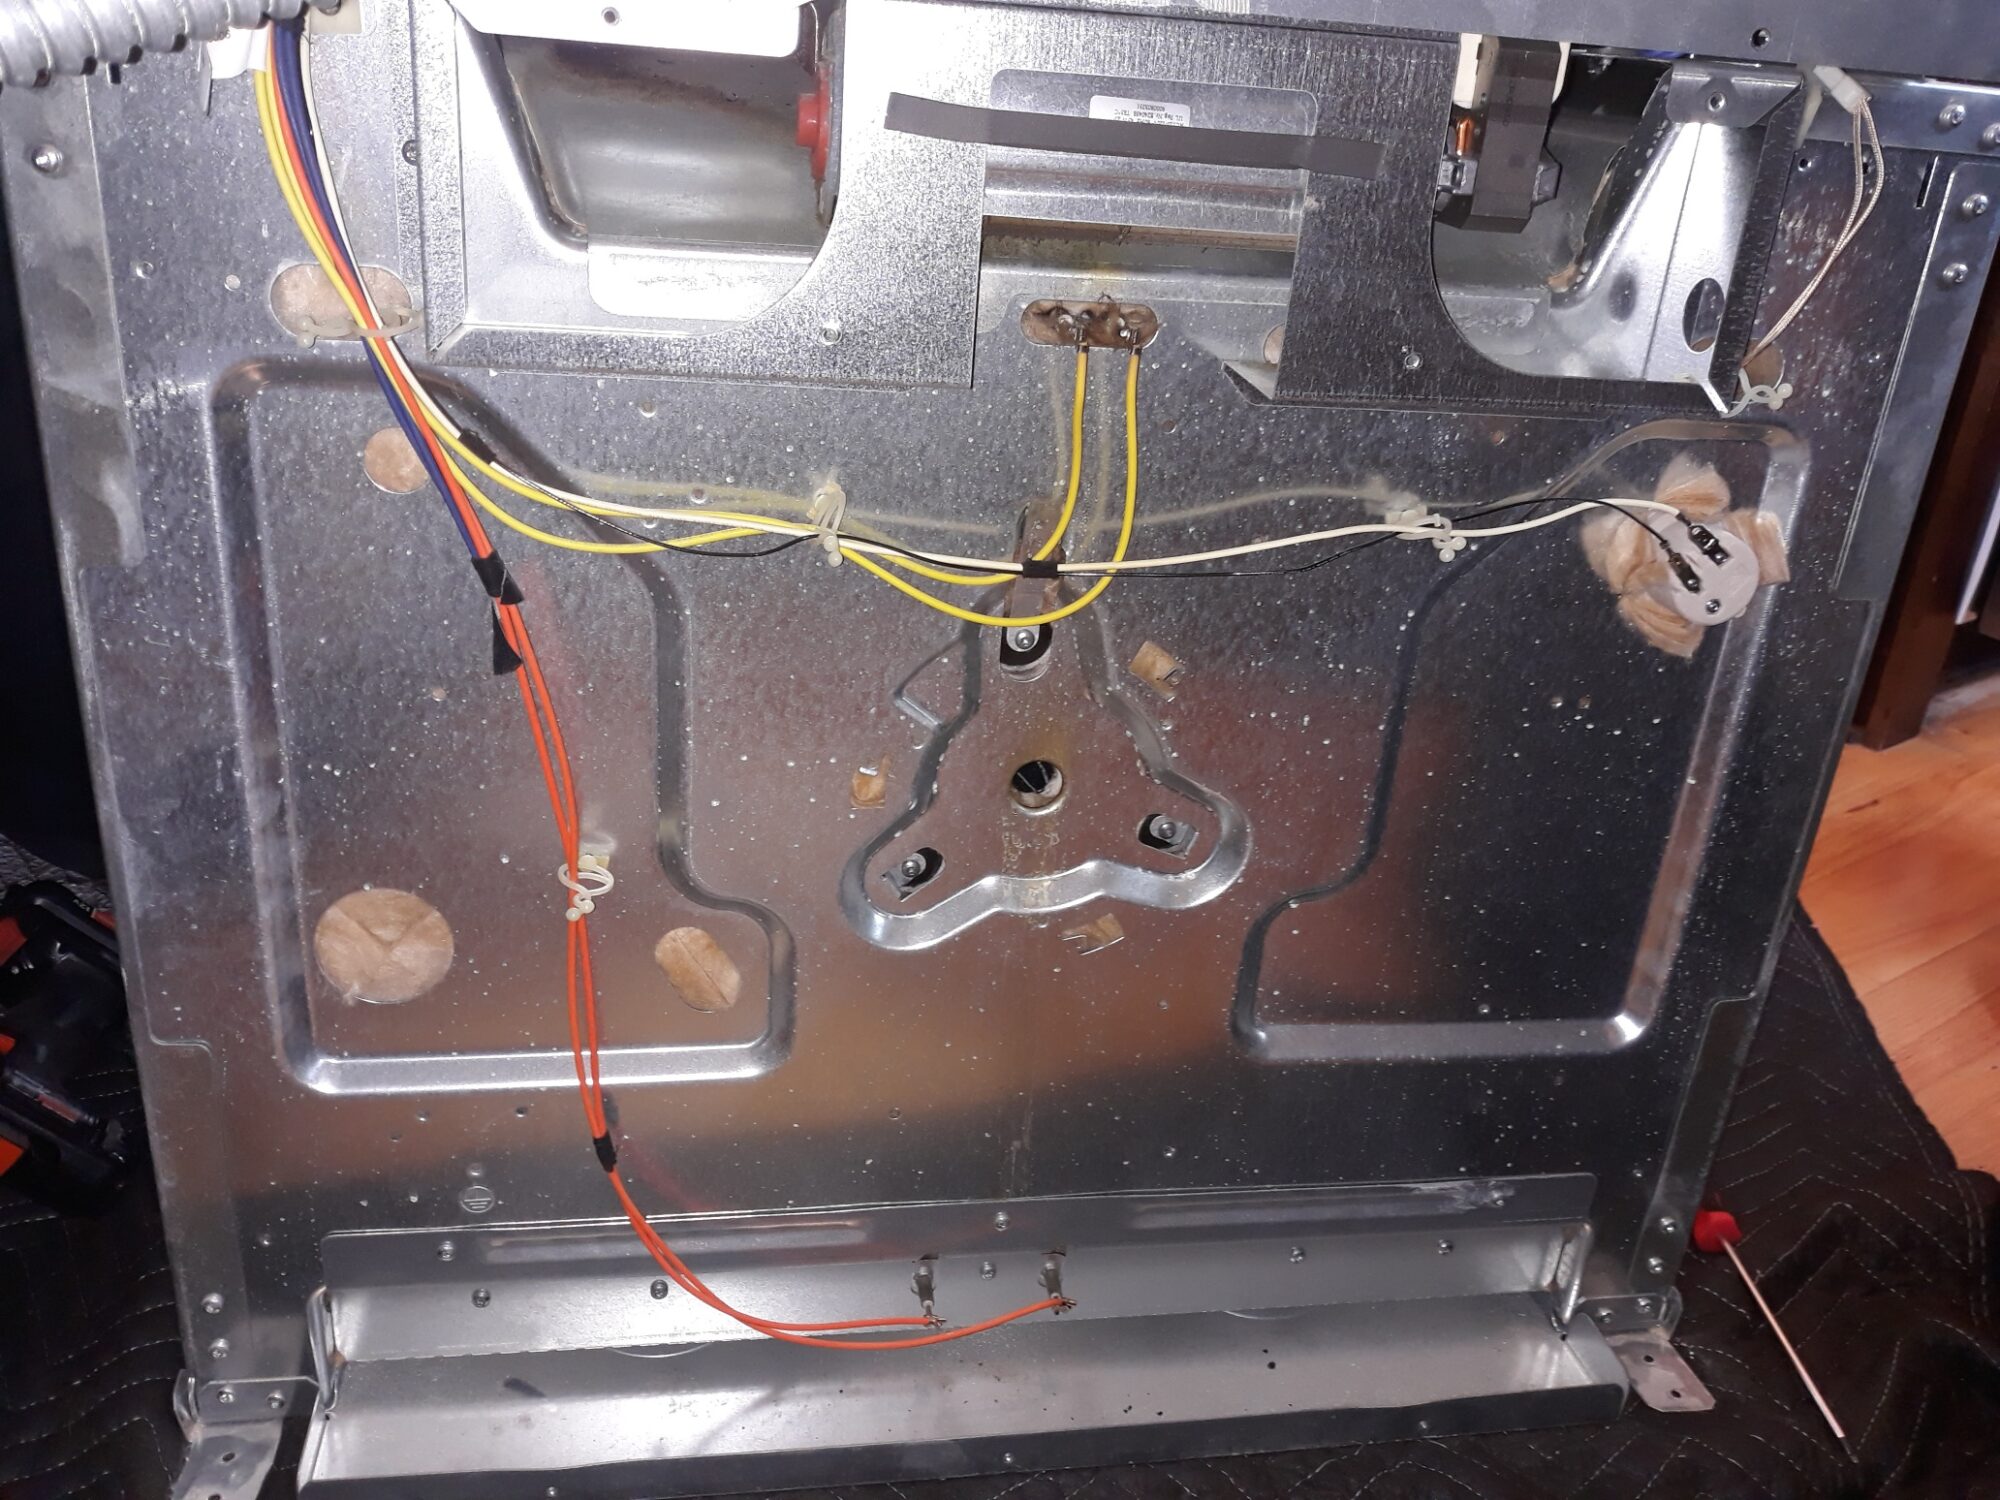 appliance repair oven repair repair required replacement of the open bake element coil, with a new heating element northshore dr eustis fl 32726